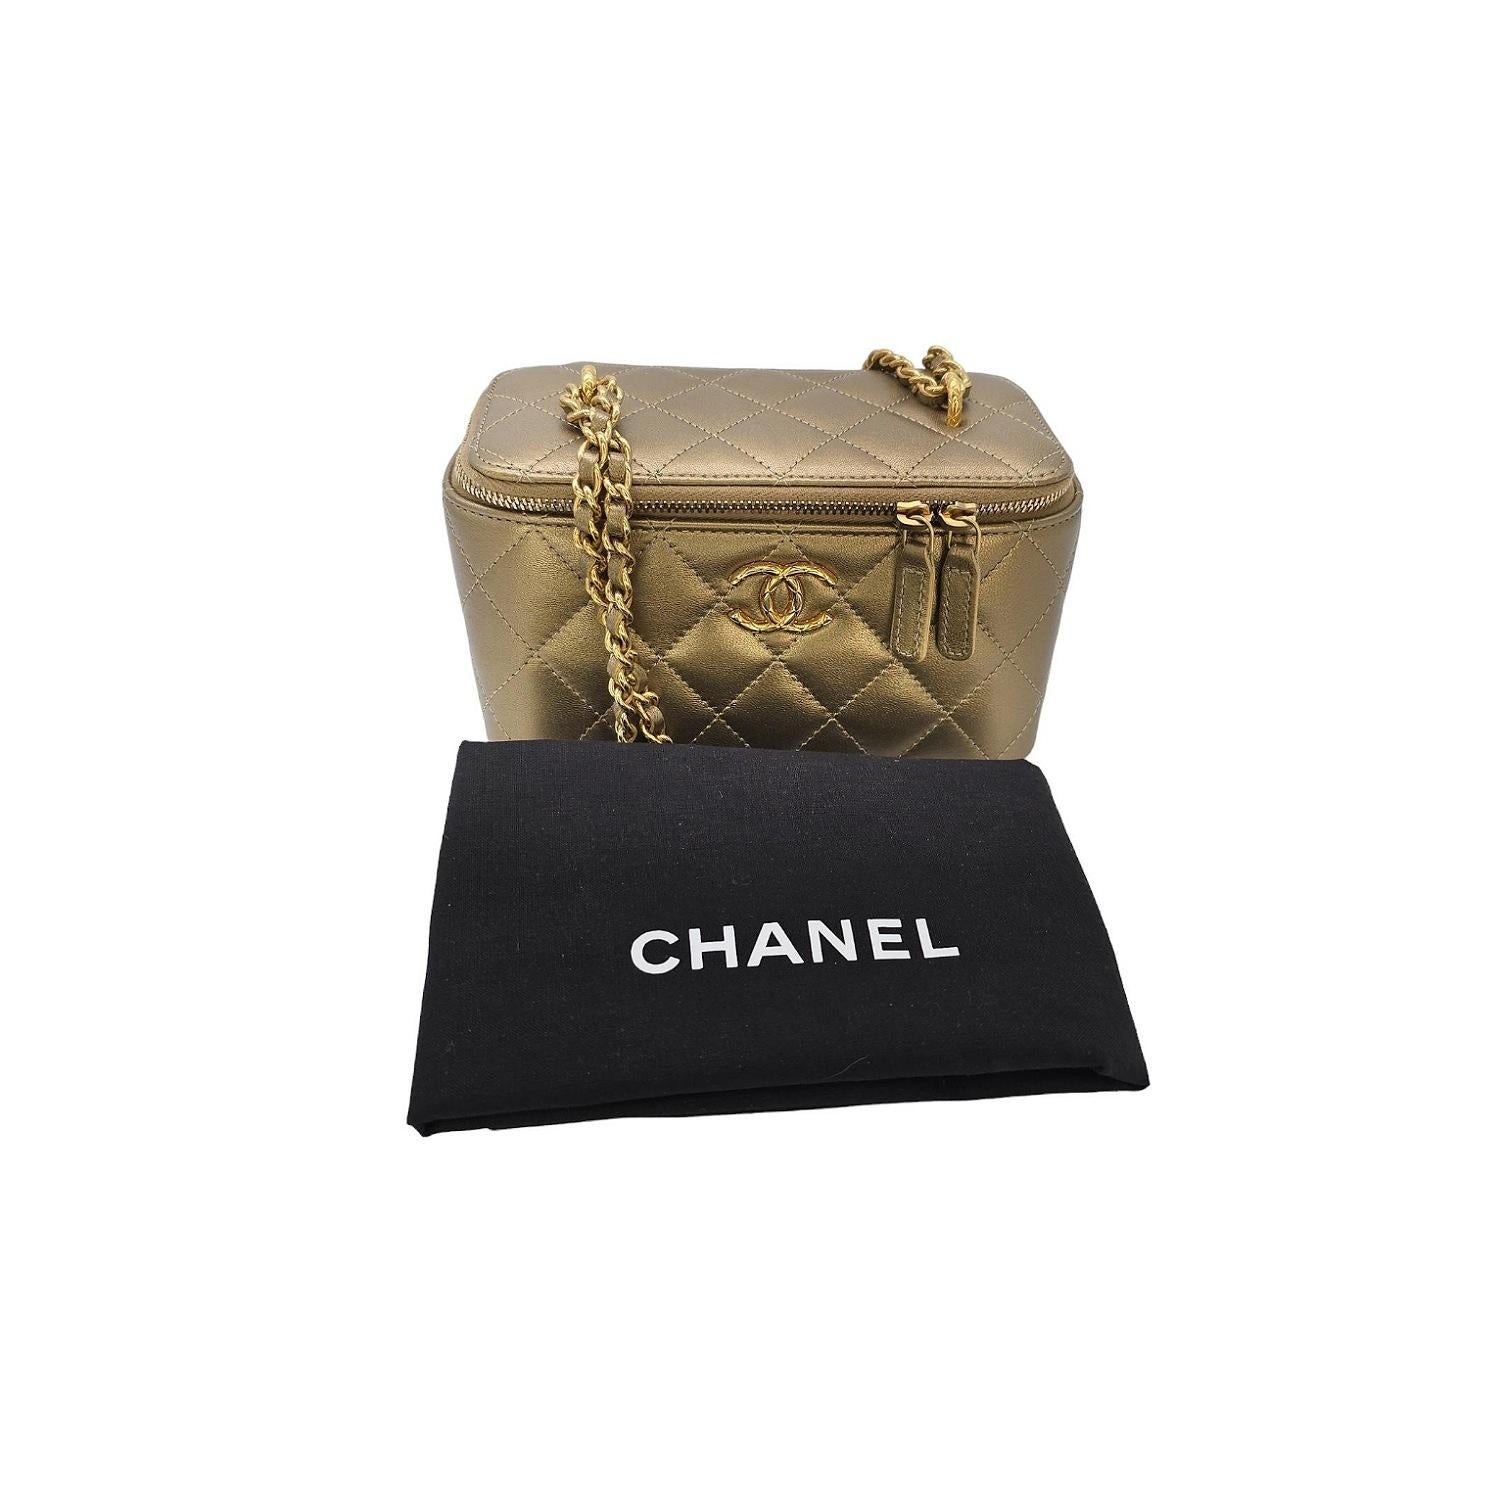 The Chanel Metallic Quilted Lambskin Small Dynasty Vanity Case is an elegant and exclusive piece from the designer brand. Crafted from metallic gold quilted lambskin leather, this vanity case exudes luxury. The dual zipper opens to a gold leather